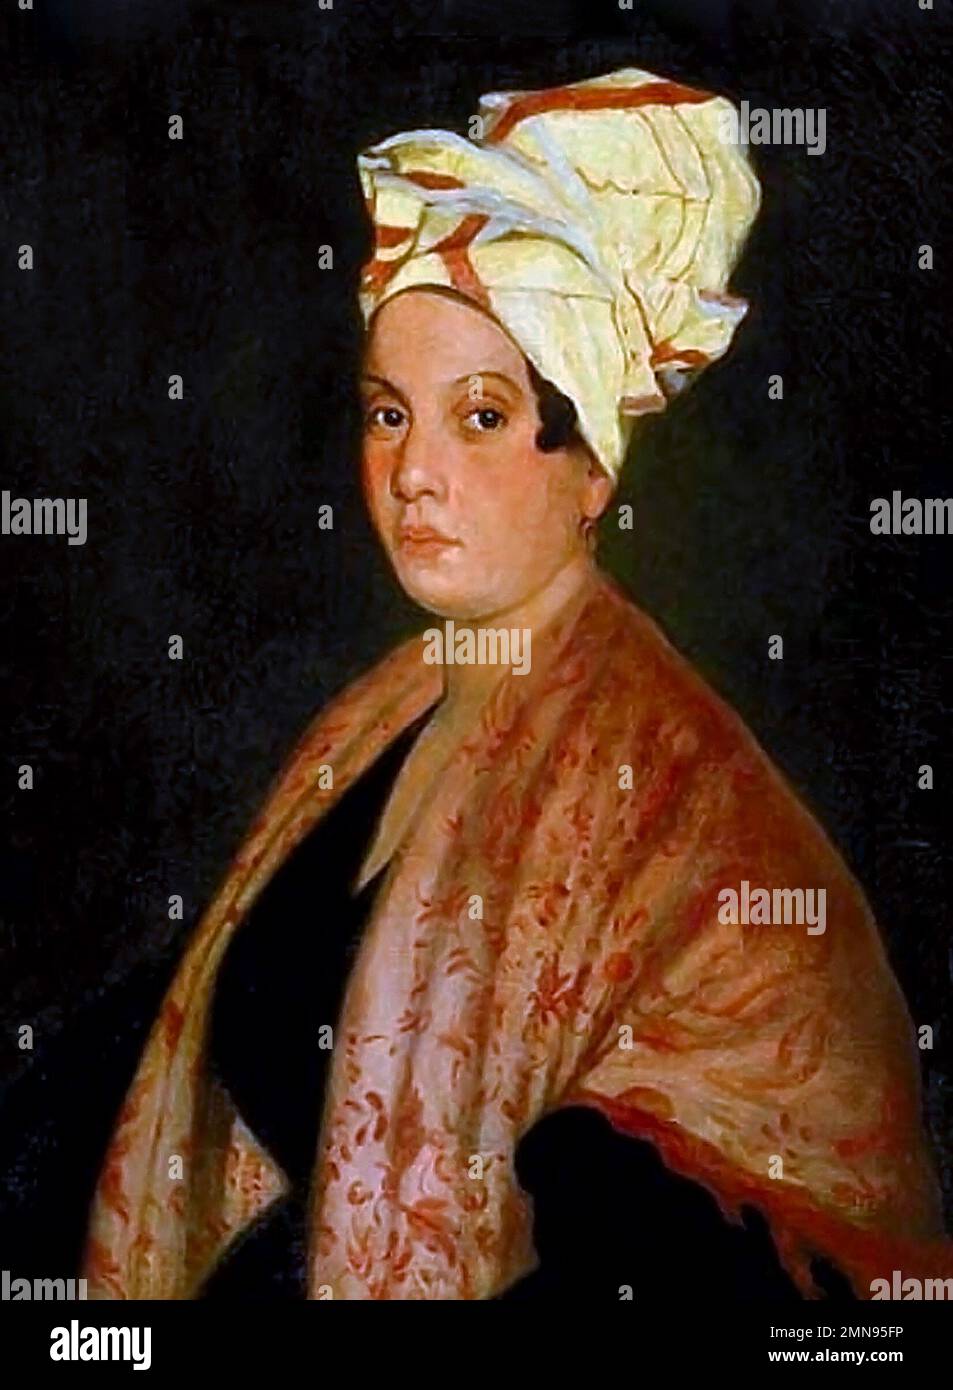 Marie Laveau. Portrait of the voodoo practitioner, Marie Catherine Laveau (1801-1881) based on an 1835 painting by George Catlin. Stock Photo